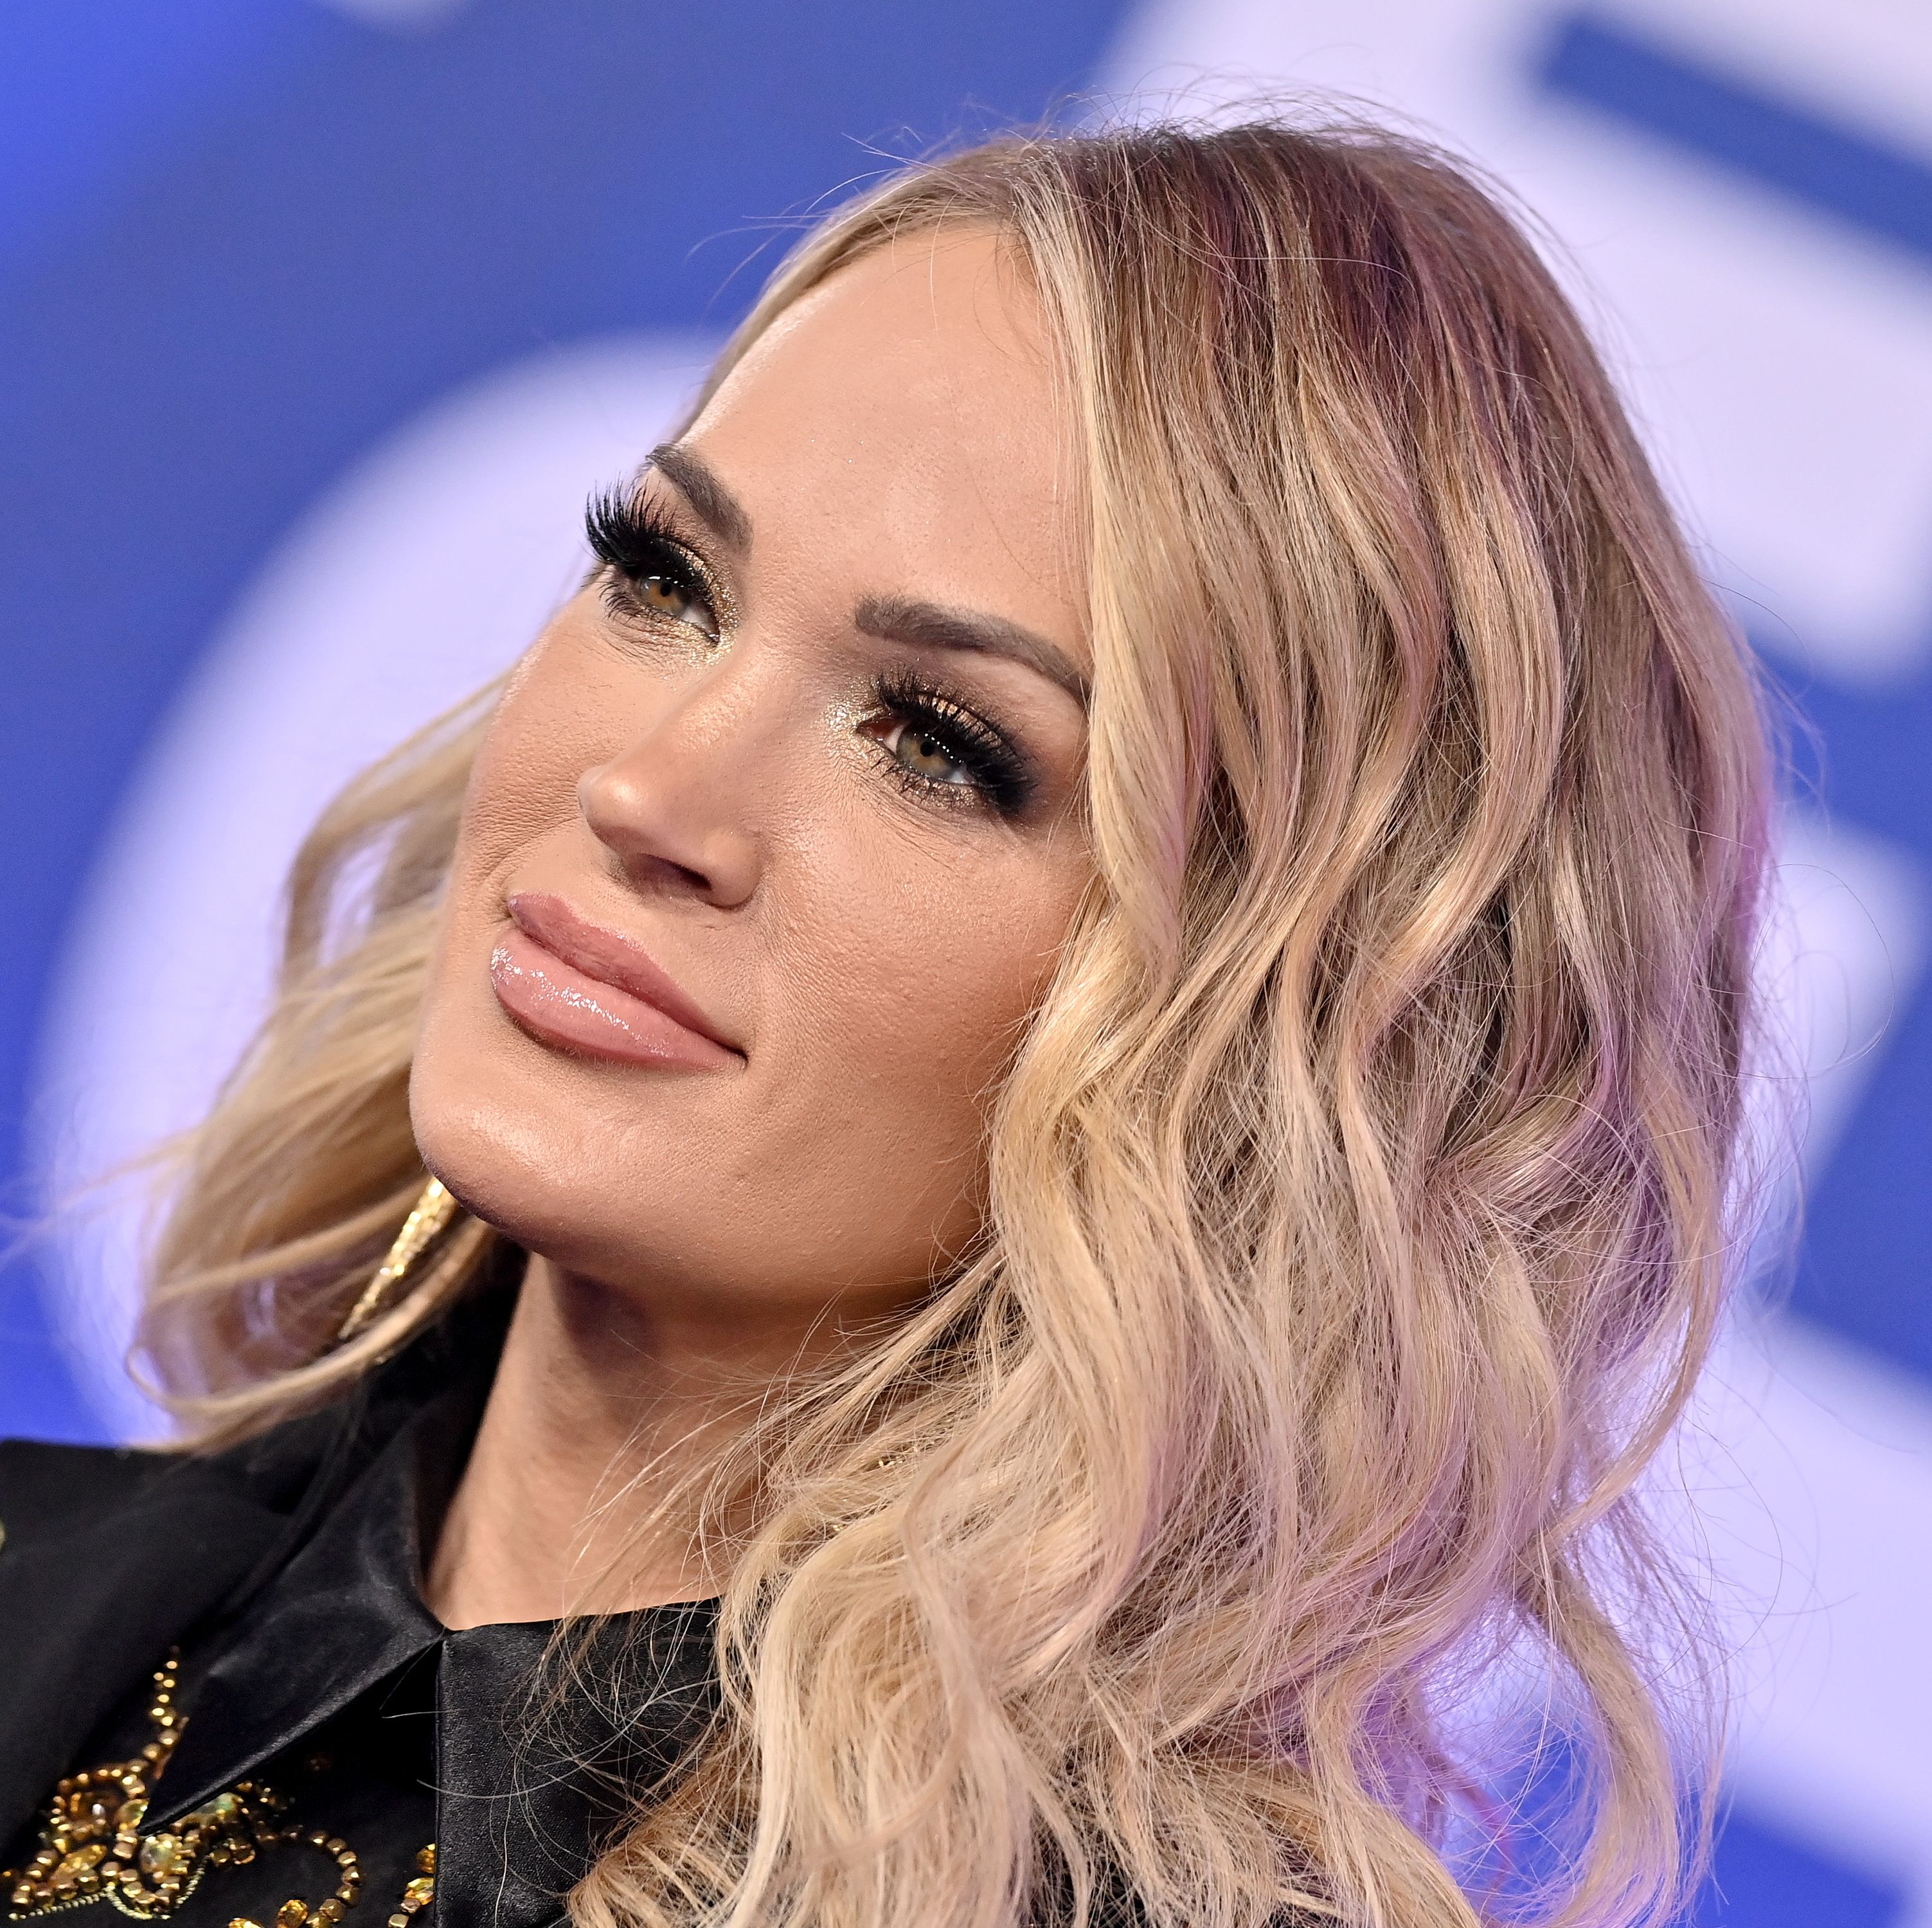 Fans Have a Lot to Say About Carrie Underwood's Latest Opry Appearance